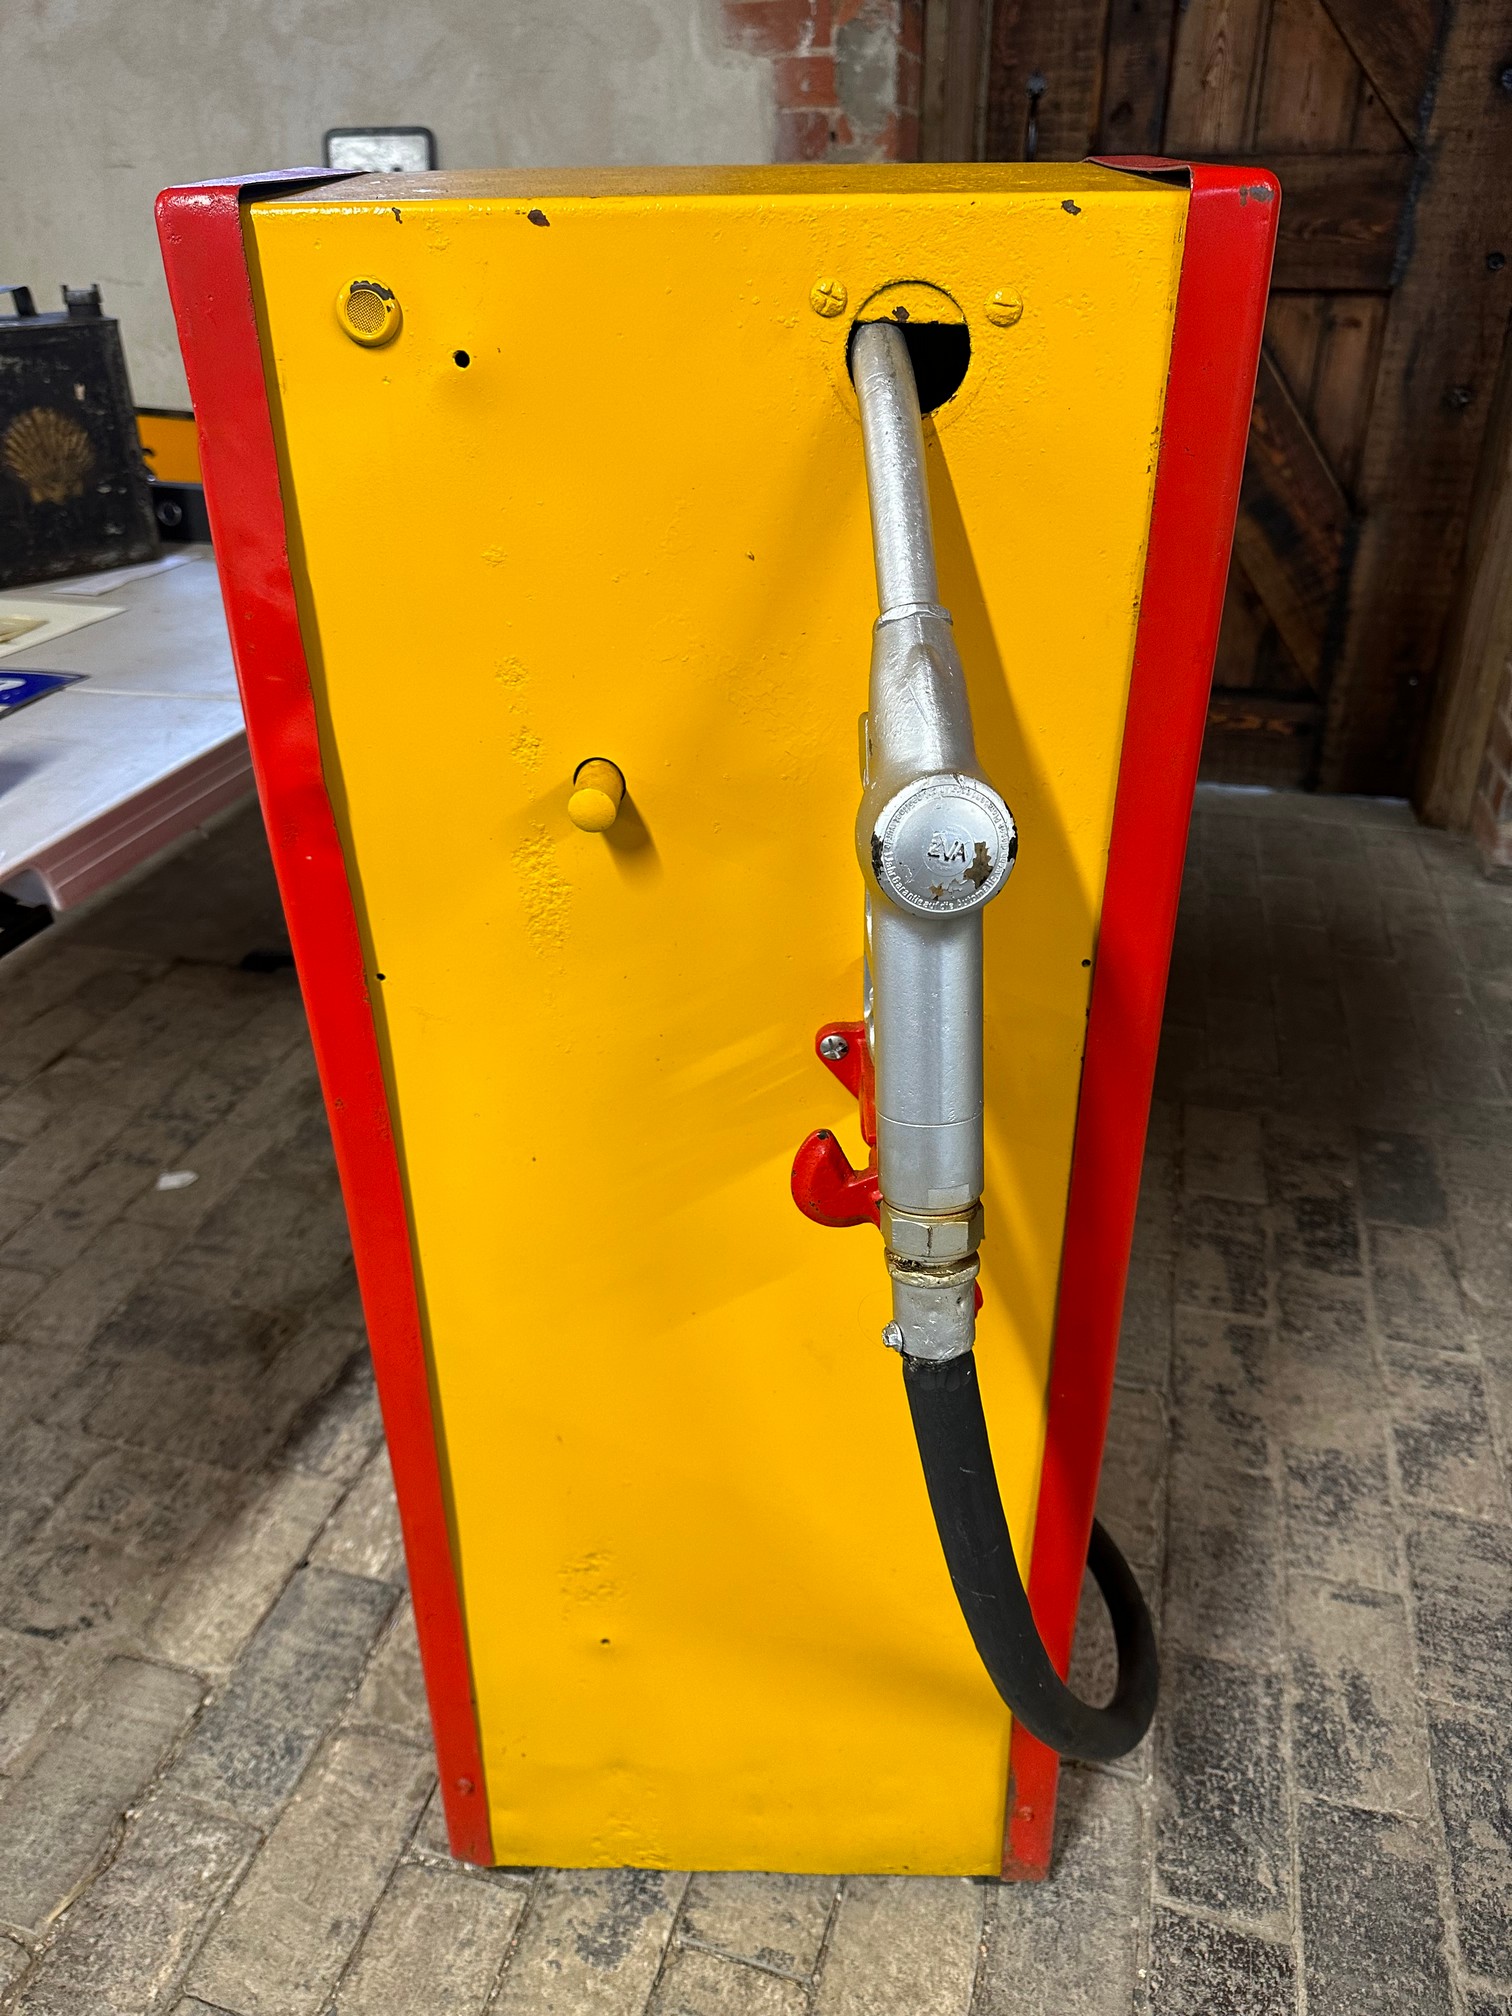 A small Gilbarco yard tube fuel pump with Shell livery, 45" x 25" (inc hose) 23 1/2" (excl hose). - Image 4 of 5